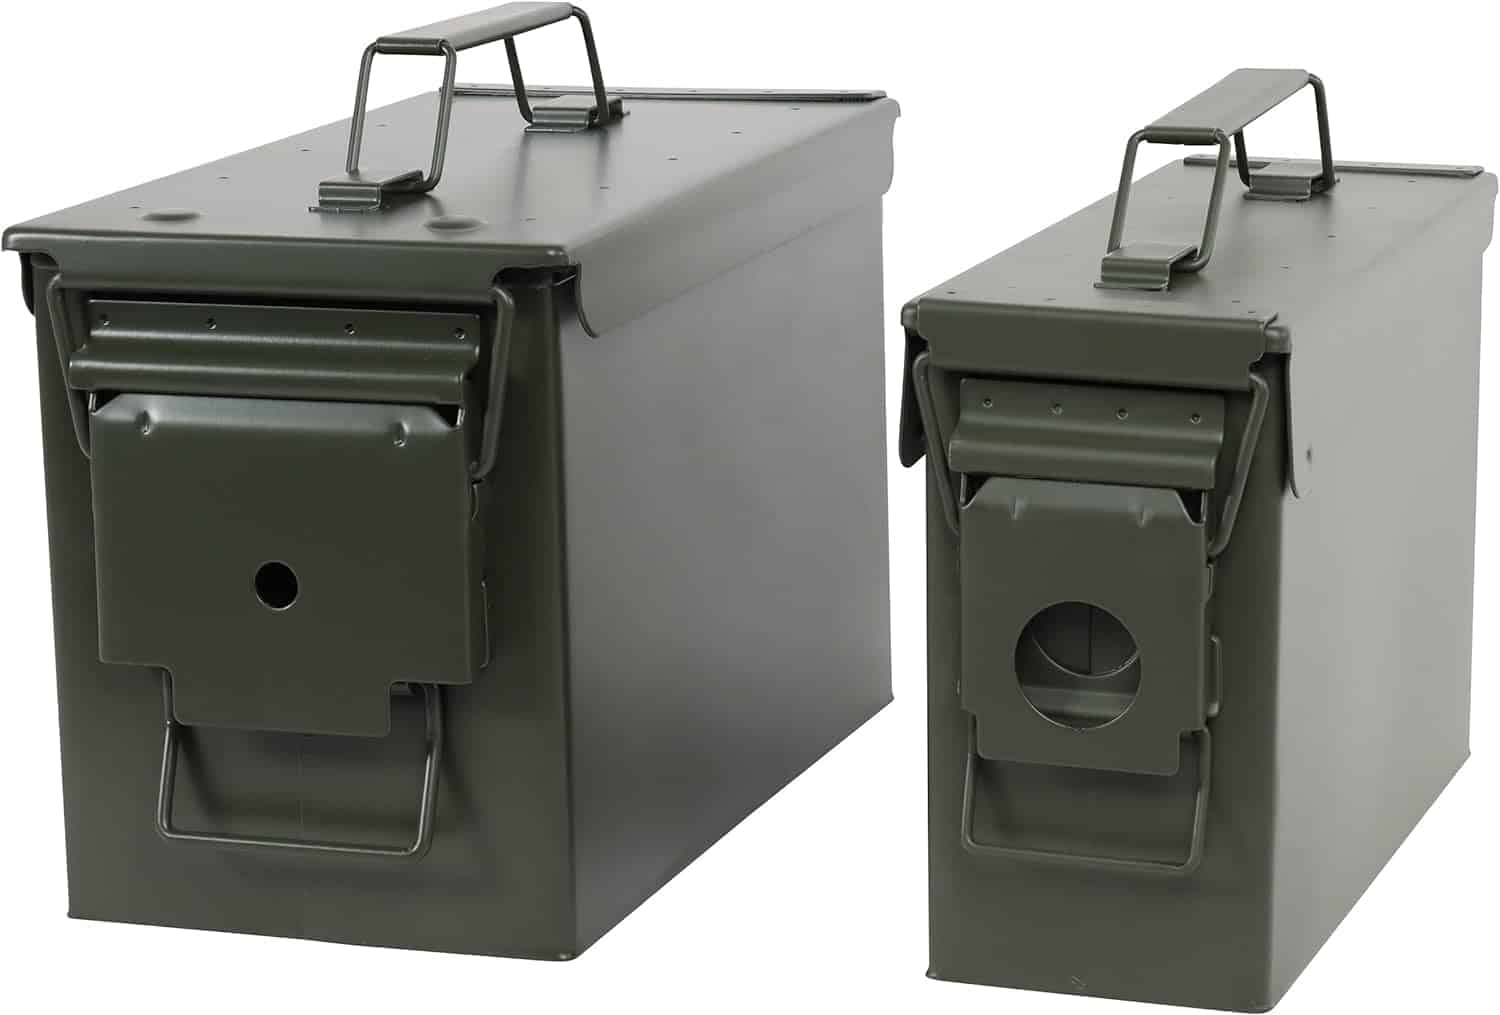 Best Ammo Cans Redneck Convent 30 and 50 Cal Metal Ammo Can 2-Pack – Military Army Solid Steel Holder Box Set for Long-Term Shotgun Rifle Ammo Storage